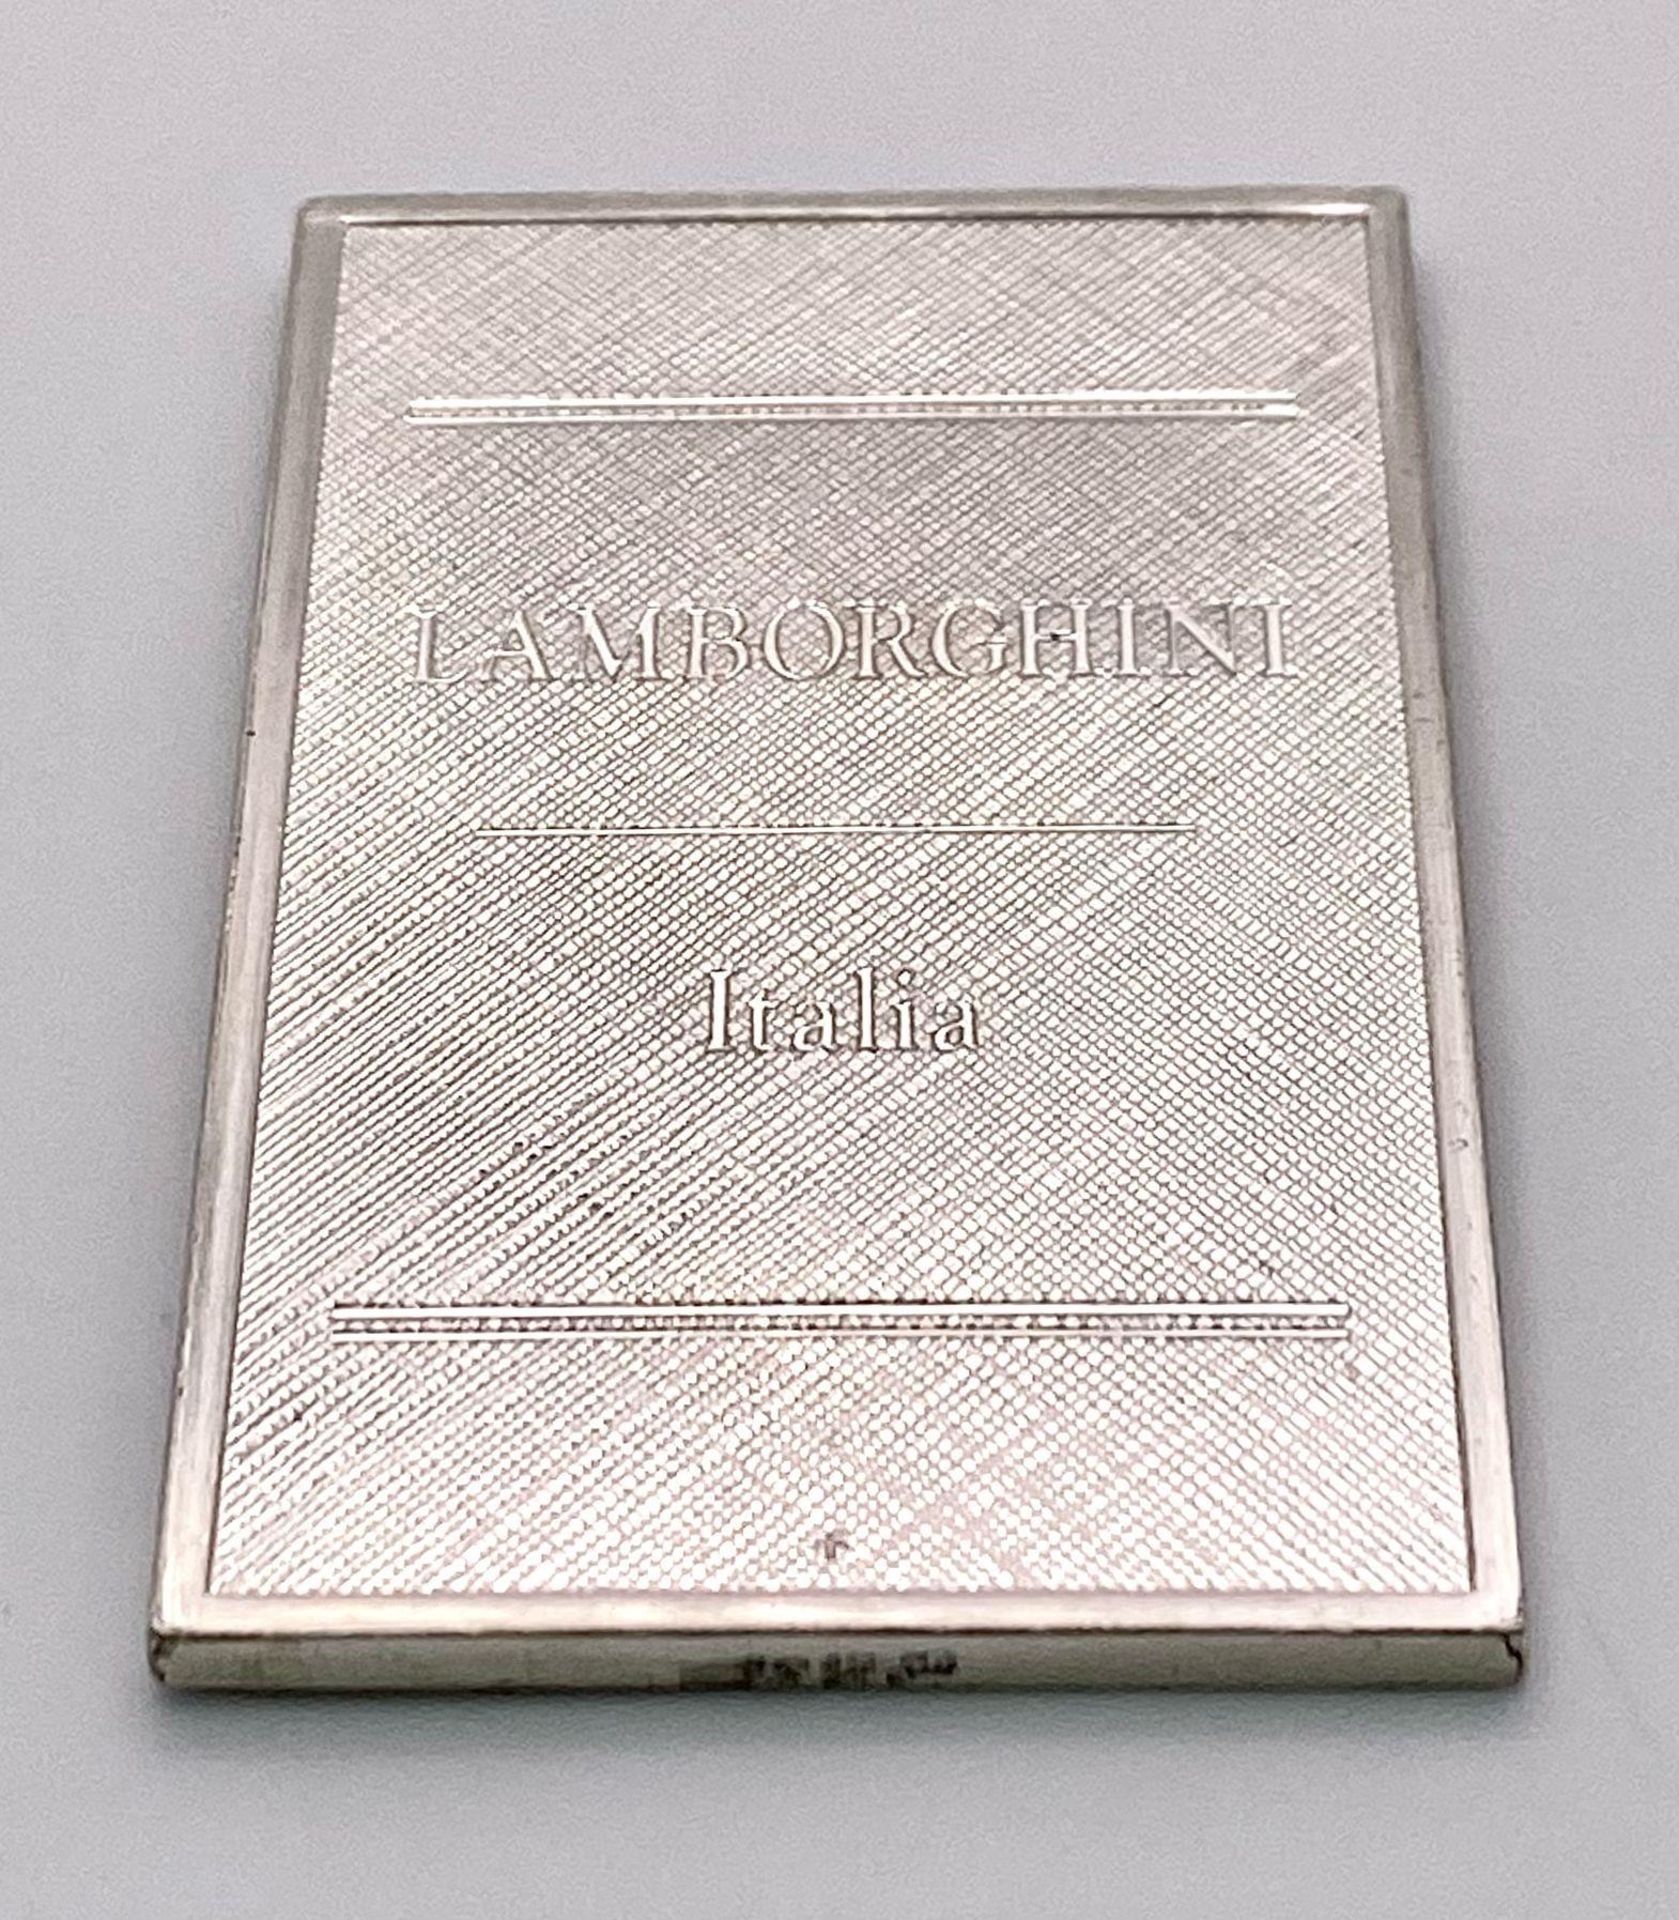 A STERLING SILVER LAMBORGHINI SYMBOL PLAQUE approx 23.76G 46mm x29mm ref: 8150 - Image 3 of 4